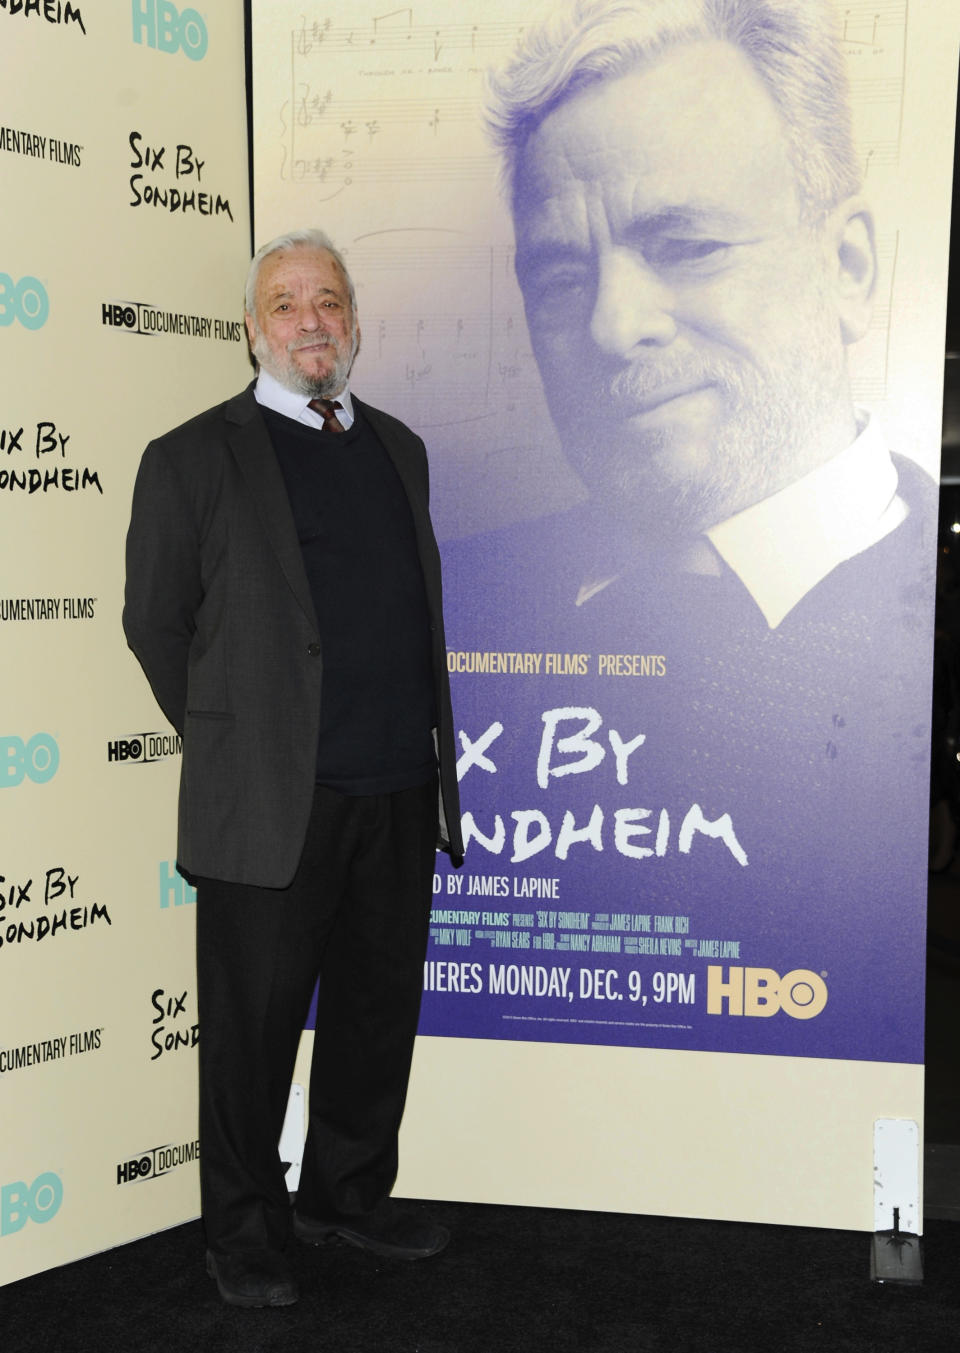 FILE - Composer and lyricist Stephen Sondheim attends the premiere of HBO's "Six By Sondheim" at the Museum of Modern Art Monday, Nov. 18, 2013, in New York. Sondheim, the songwriter who reshaped the American musical theater in the second half of the 20th century, has died at age 91. Sondheim's death was announced by his Texas-based attorney, Rick Pappas, who told The New York Times the composer died Friday, Nov. 26, 2021, at his home in Roxbury, Conn. (Photo by Evan Agostini/Invision/AP, File)